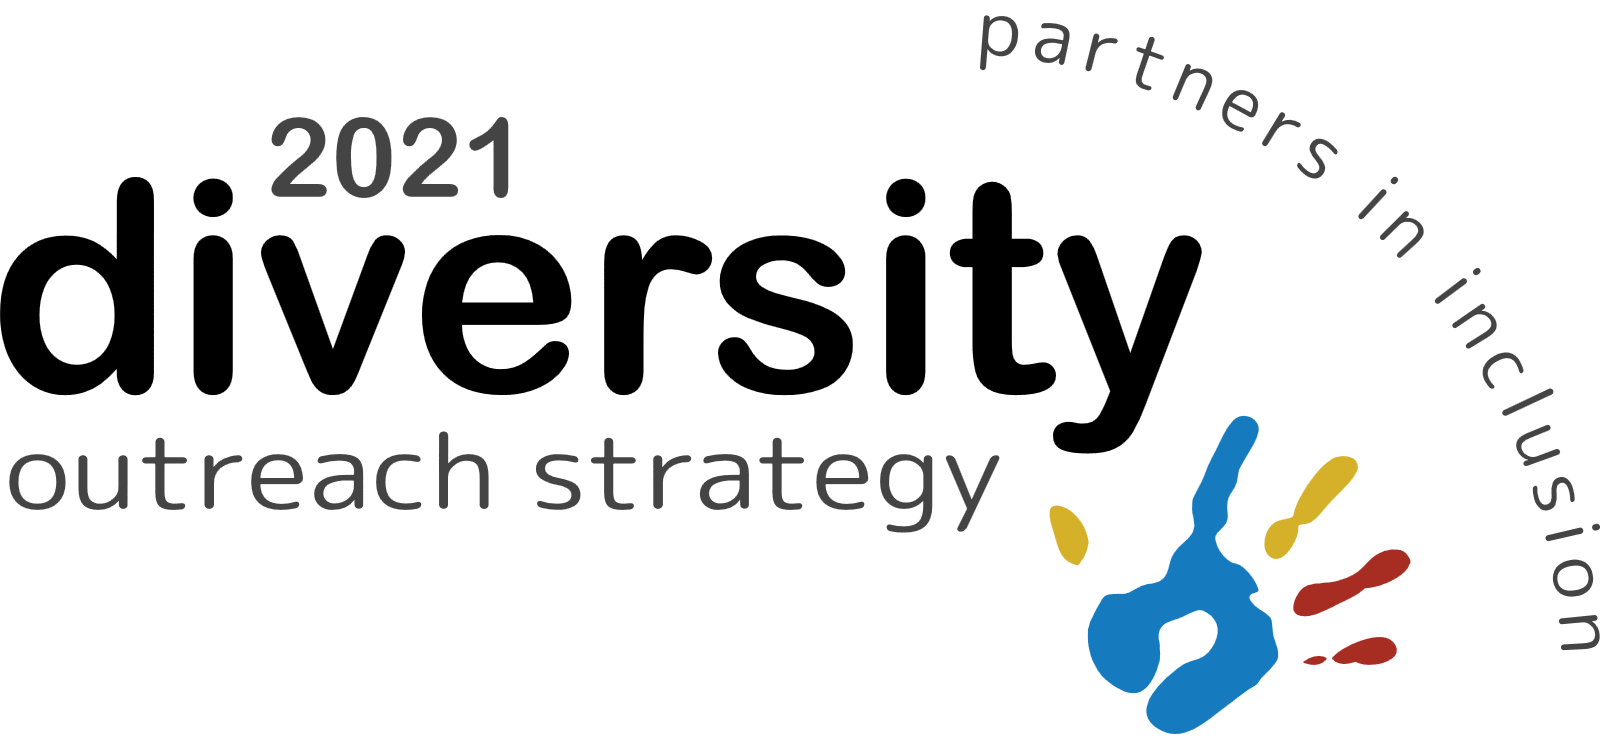 2021 diversity outreach strategy logo with a handprint